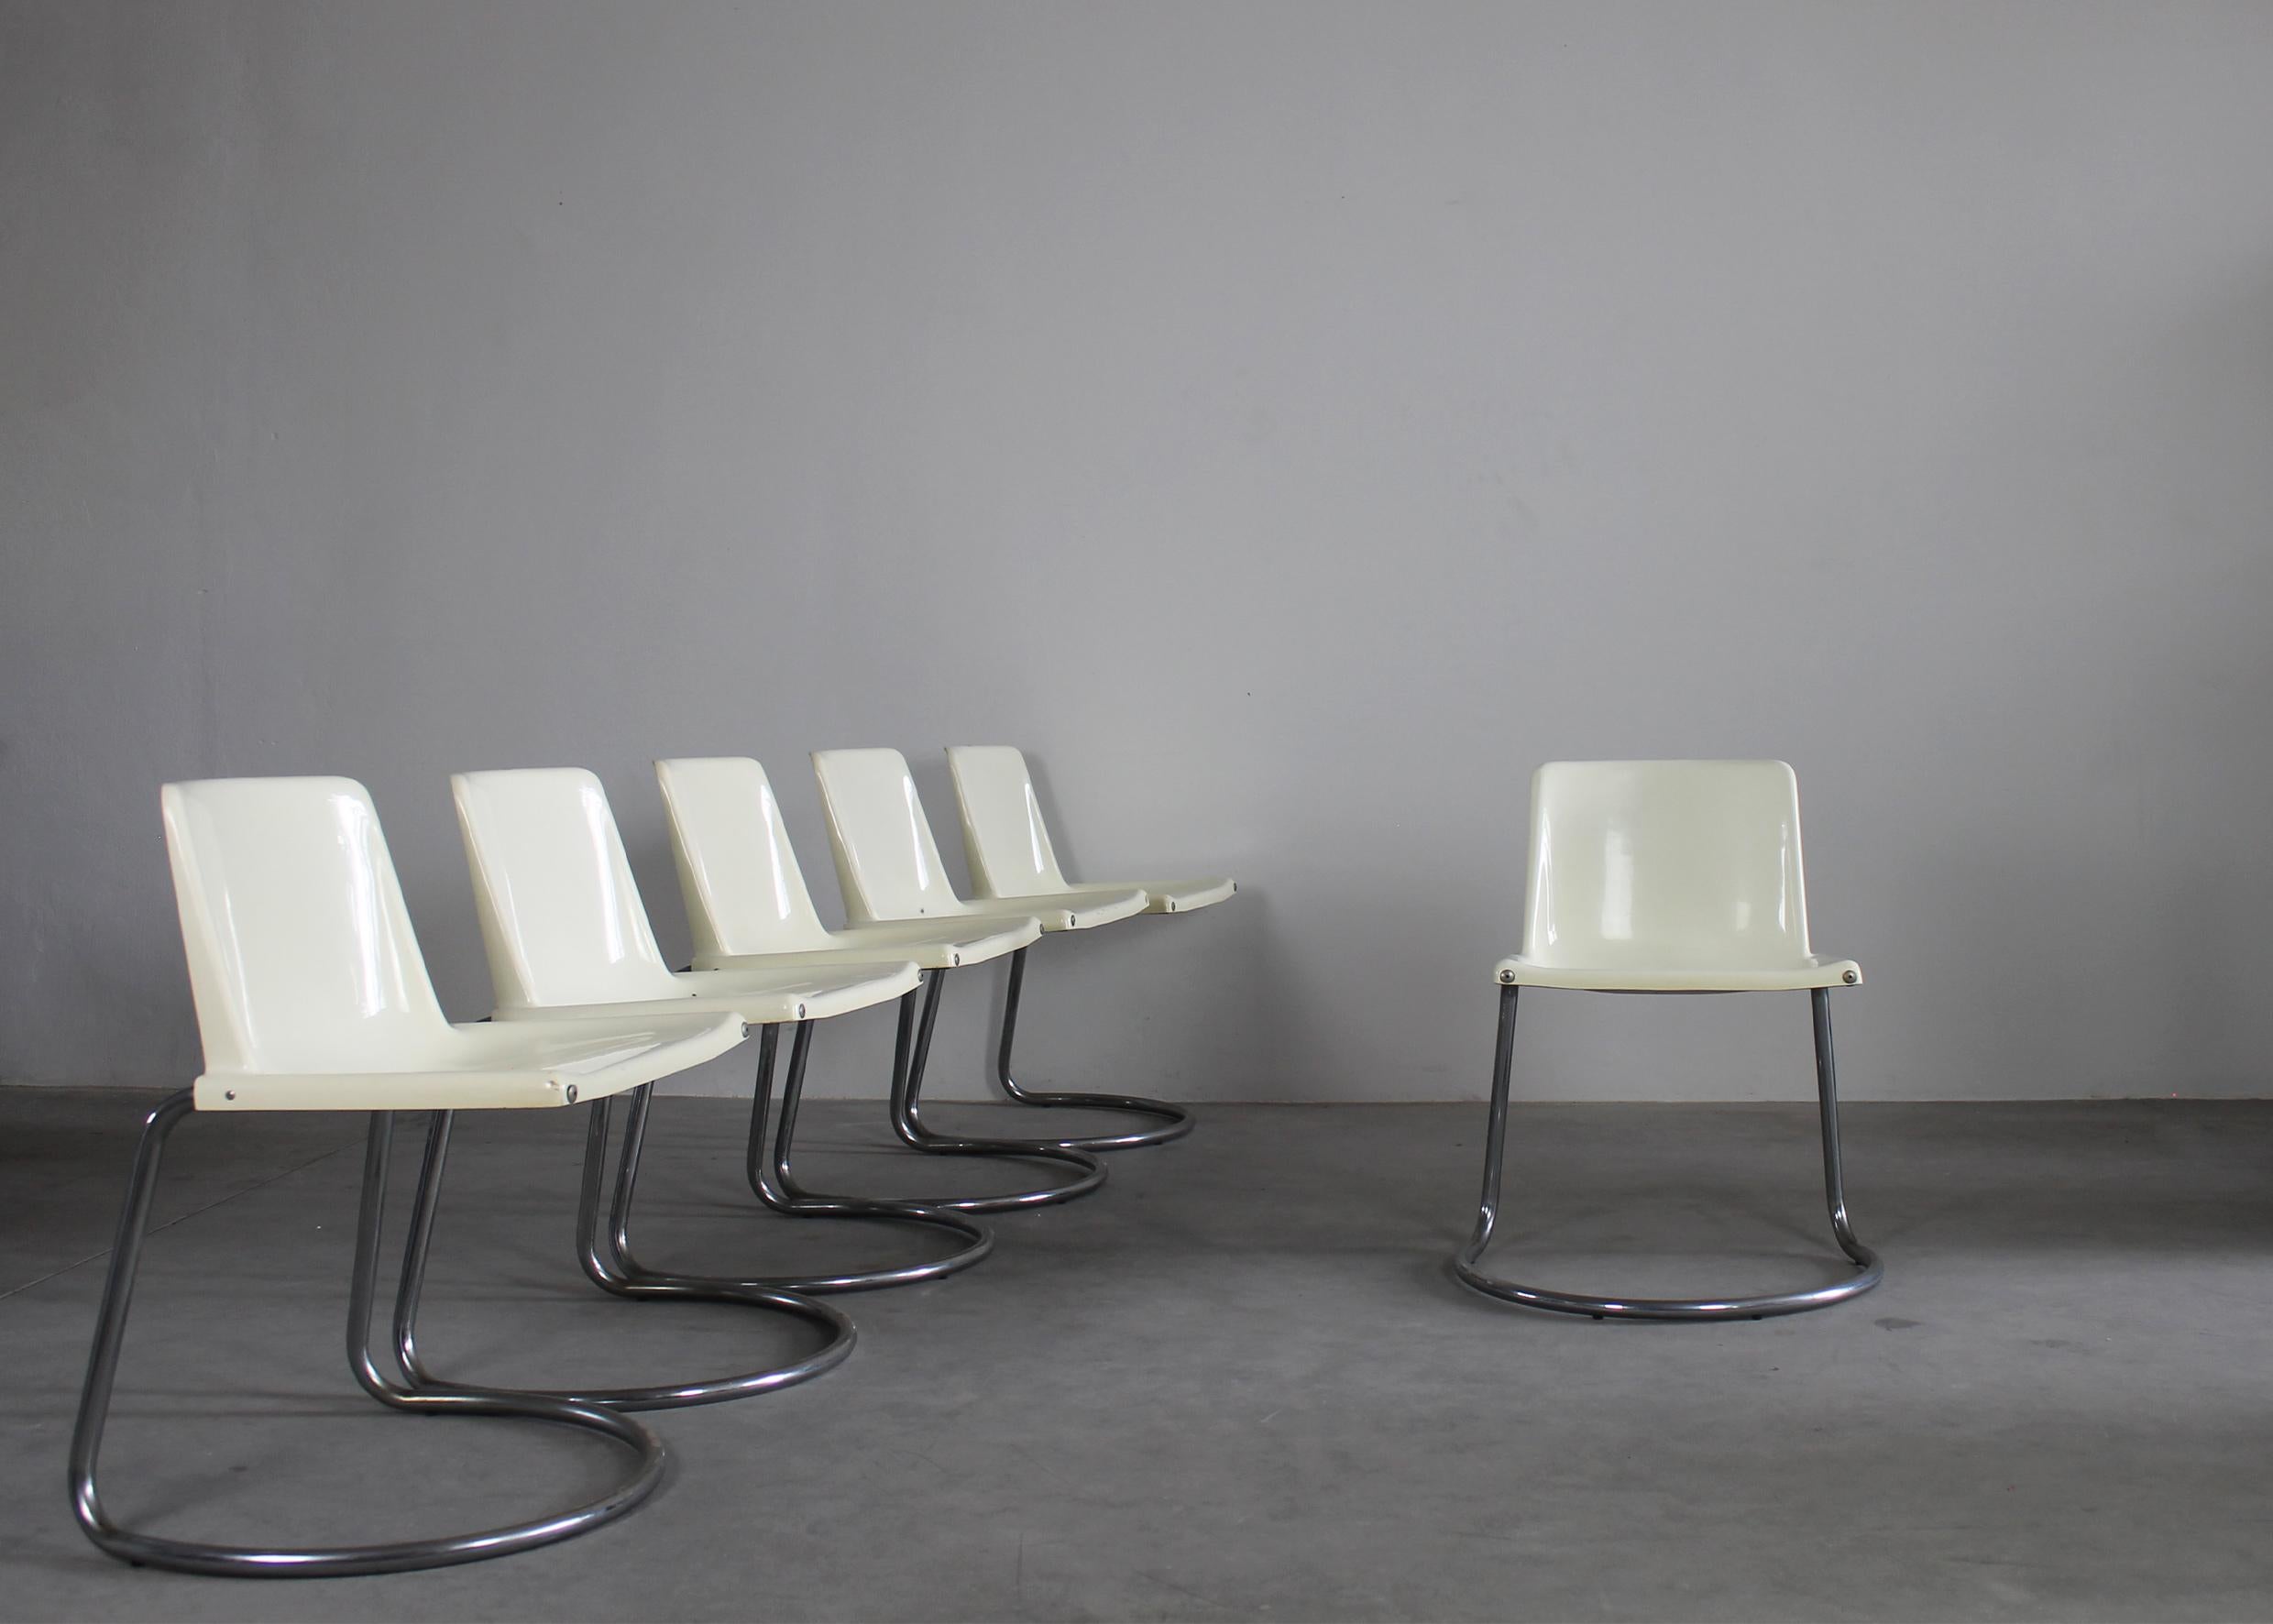 Set of six Alessia chairs with legs in tubular chromed metal and seats in white ABS, designed by Giotto Stoppino and manufactured by Driade in the 1970s. 

(Manufacturer's brand visible under the seats)

Giotto Stoppino is one of the central figures